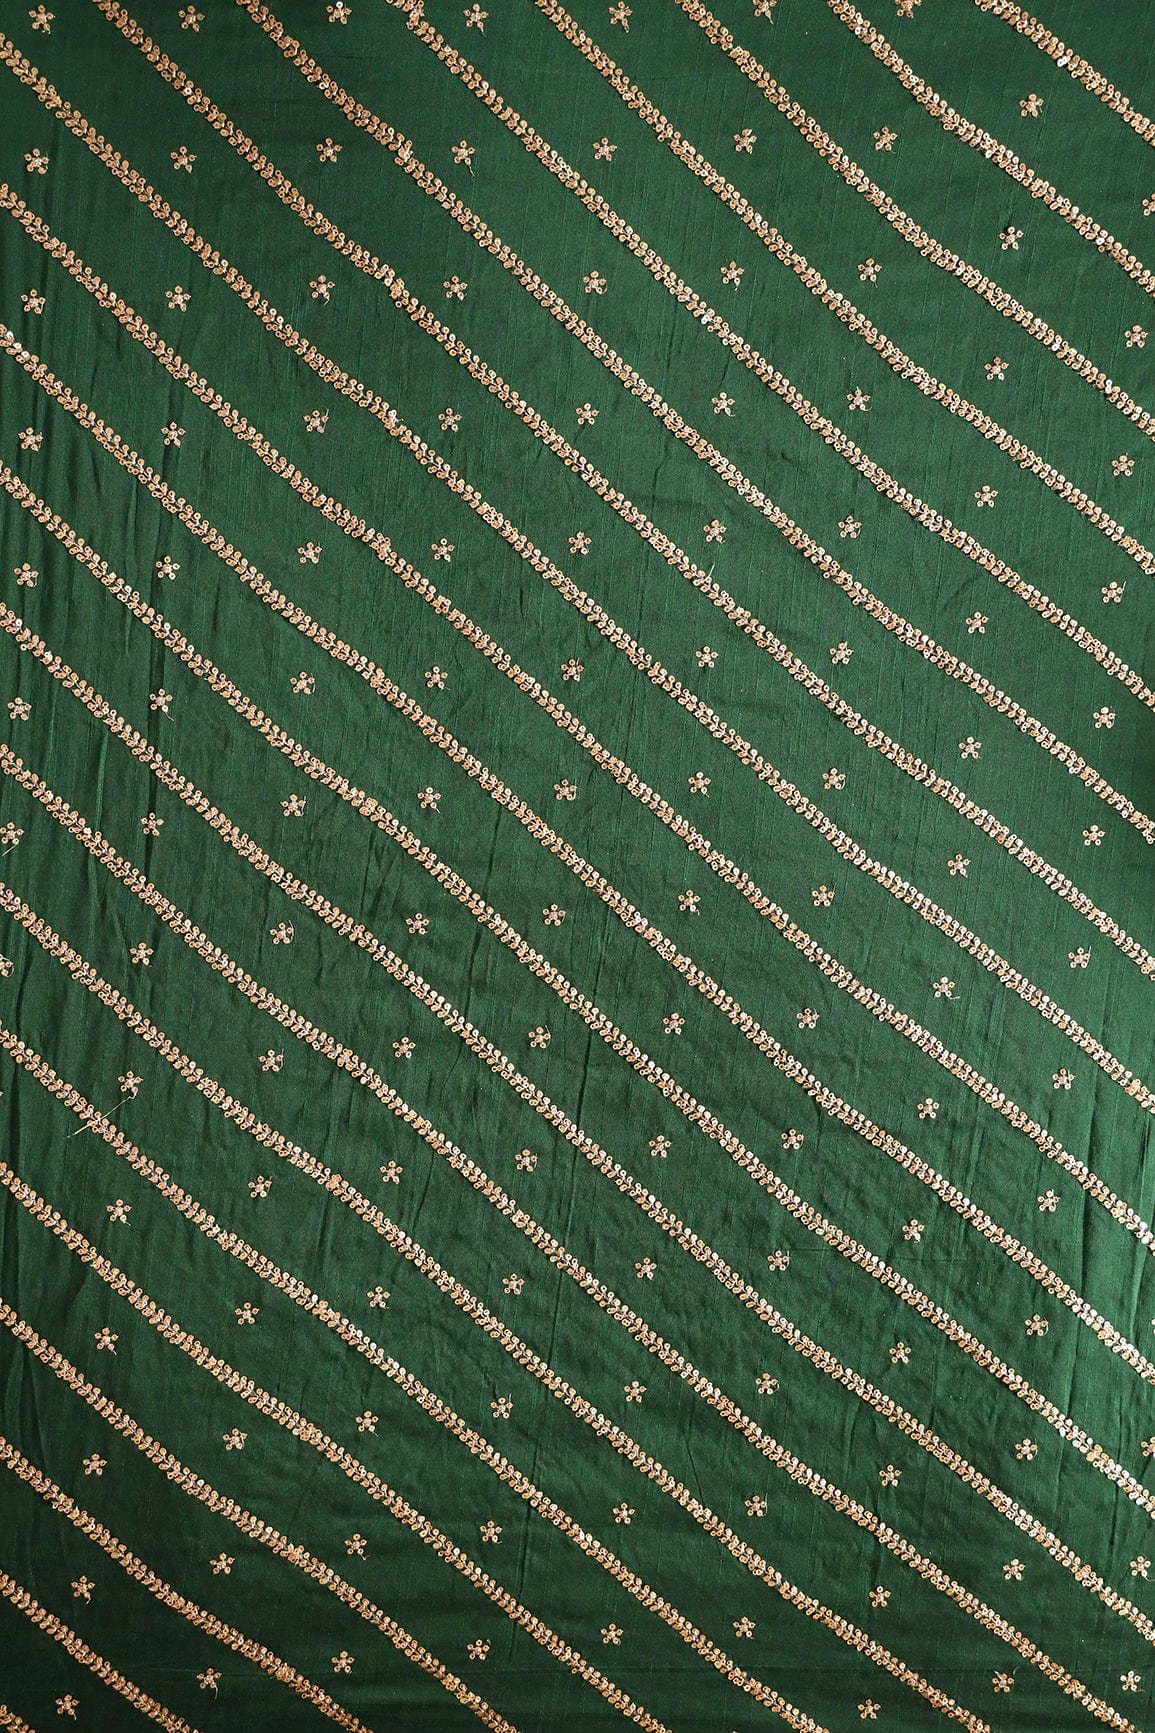 doeraa Embroidery Fabrics Gold Sequins With Gold Zari Stripes And Small Motif Embroidery Work On Bottle Green Raw Silk Fabric